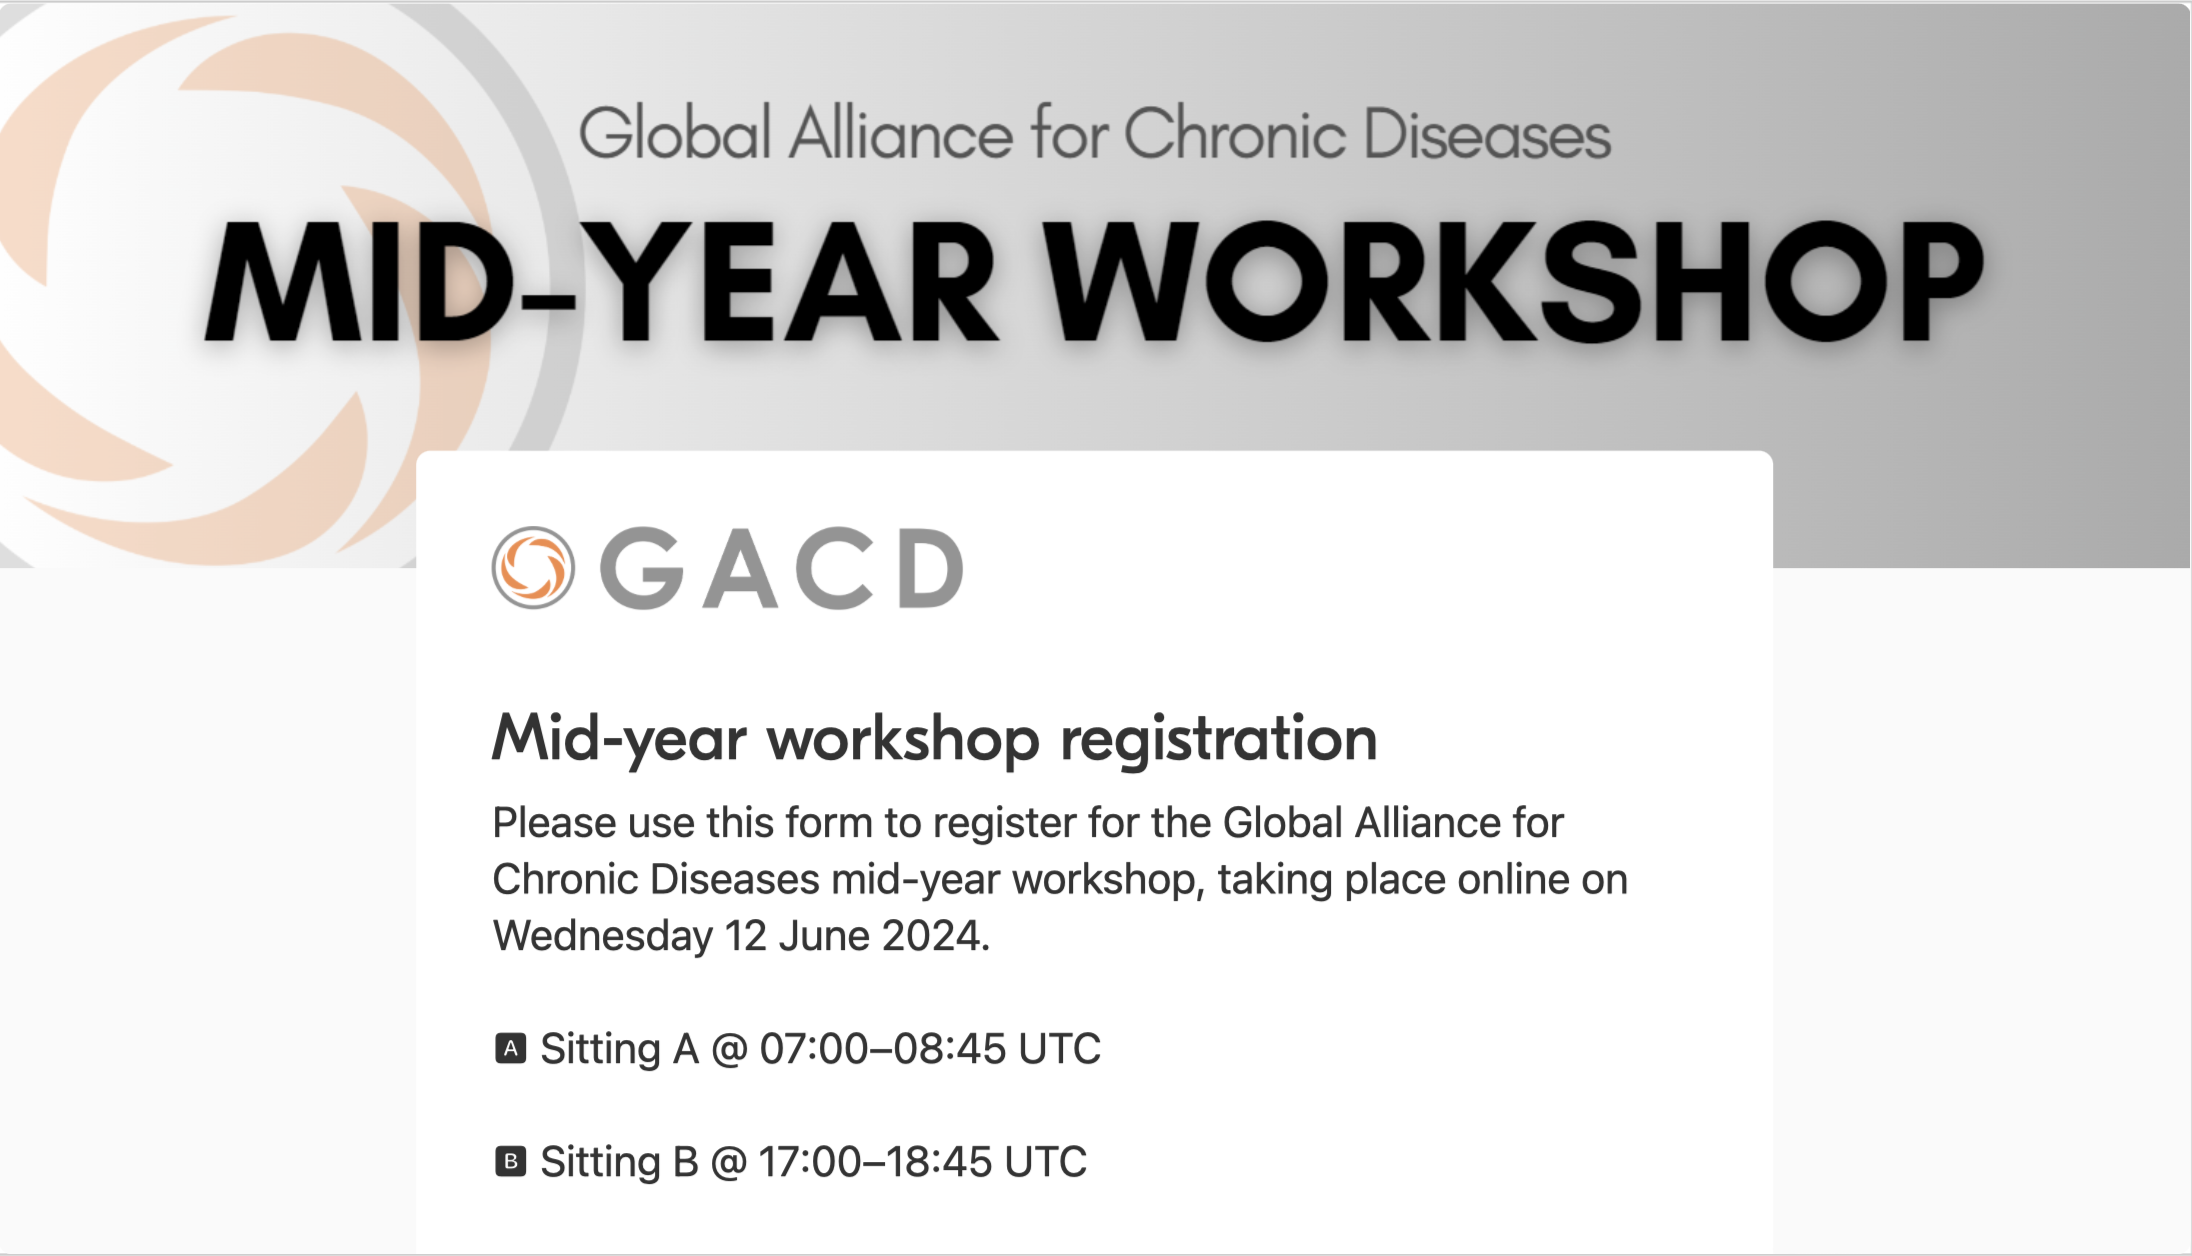 GACD mid-year workshop - Theories, models, and frameworks for implementation science